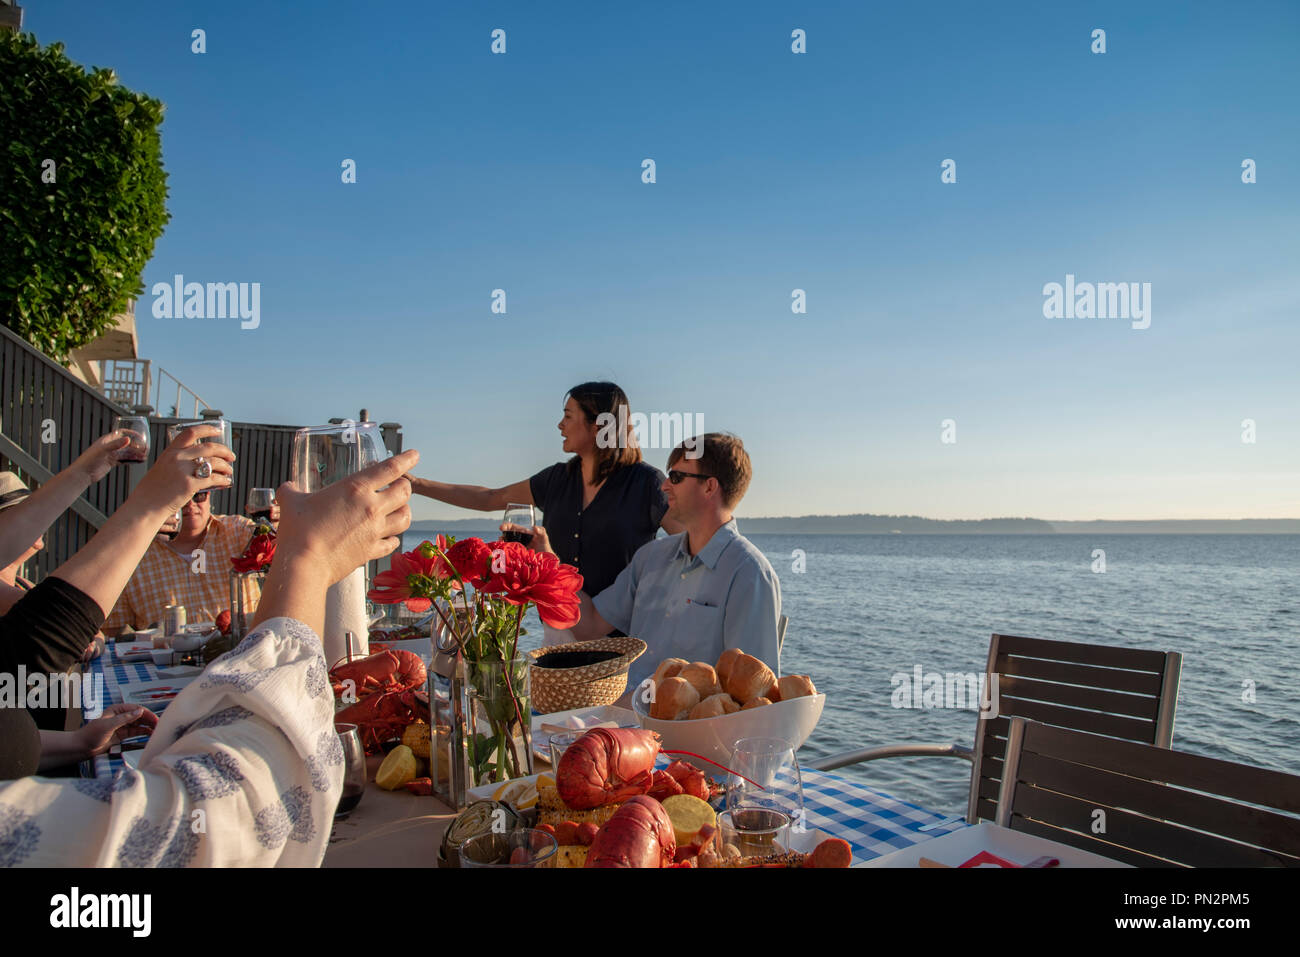 Group of friends raising glasses at a seafood dinner seaside in late afternoon sun. Stock Photo